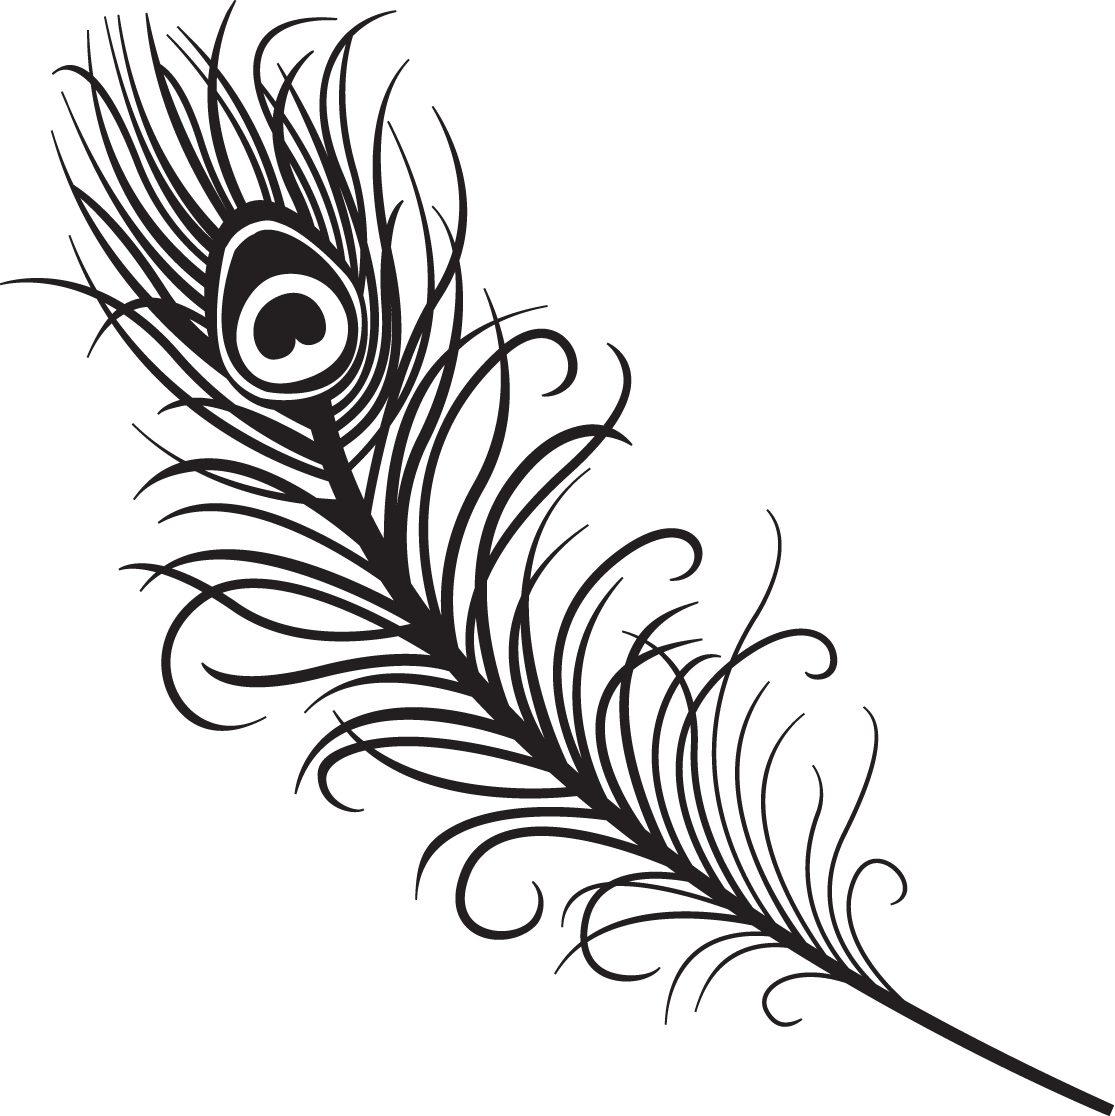 Peacock feather black and. Feathers clipart geometric